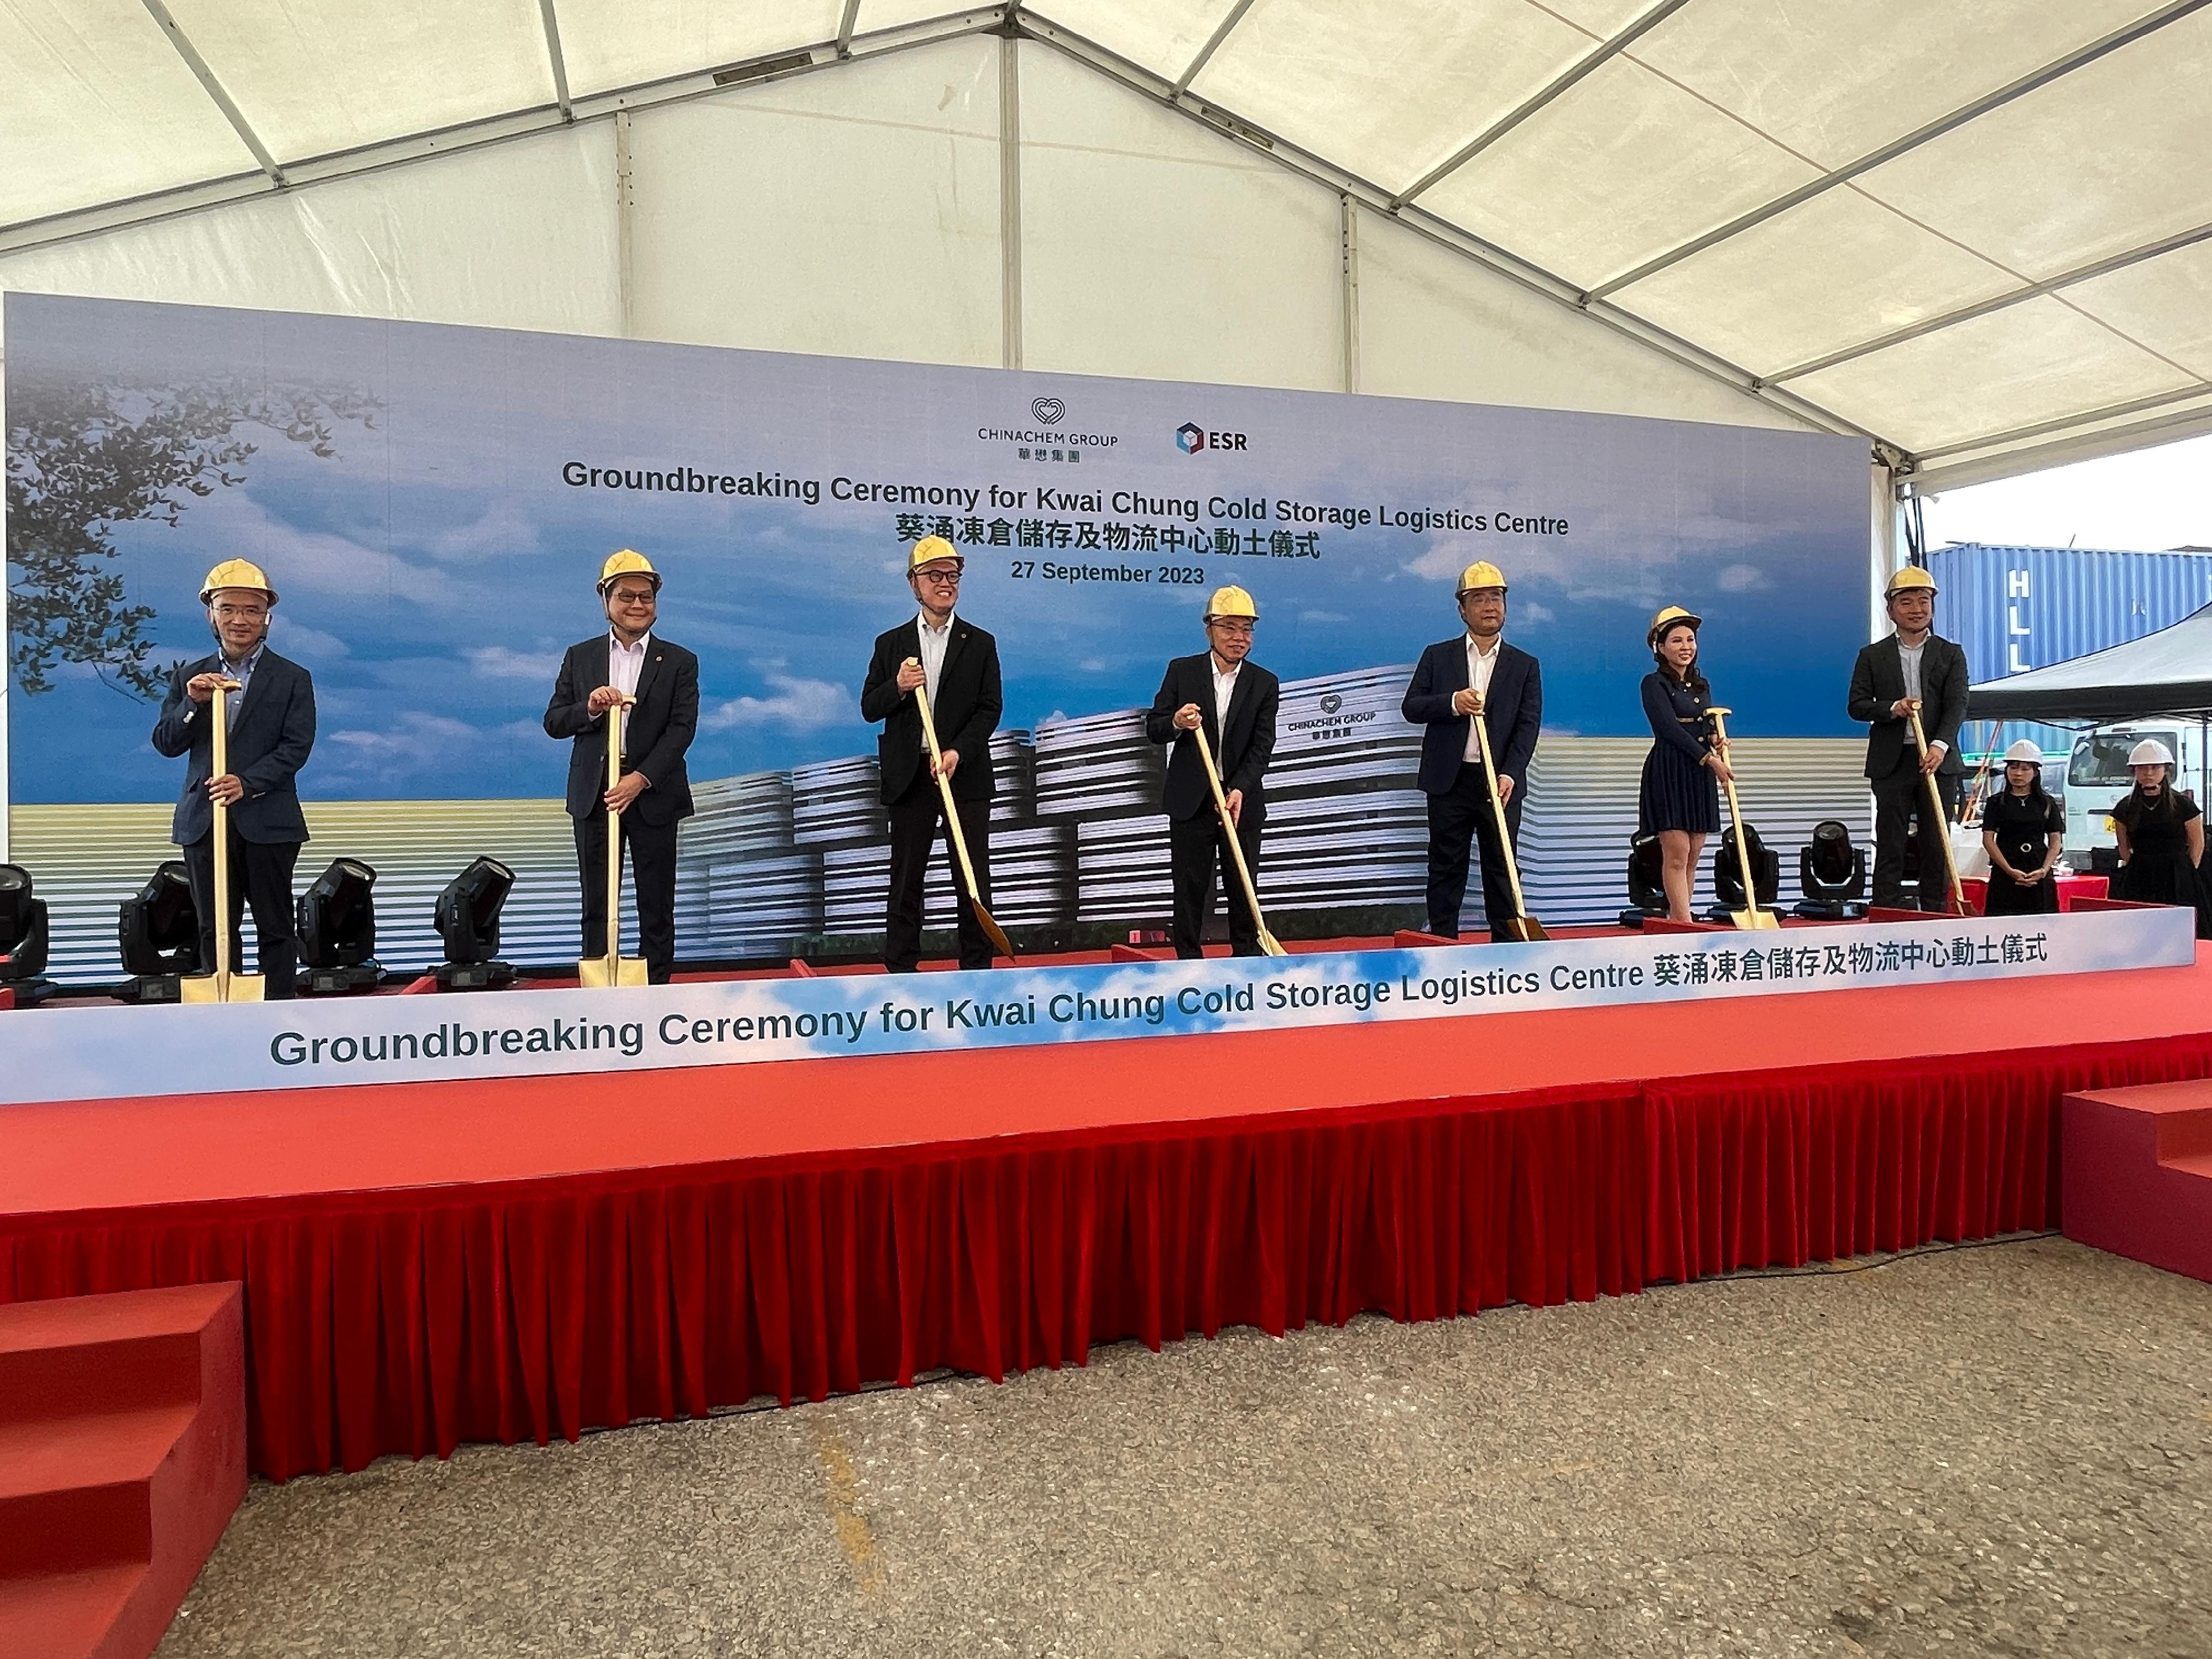 The Secretary for Transport and Logistics, Mr Lam Sai-hung, today (September 27) officiated at the Groundbreaking Ceremony for Kwai Chung Cold Storage Logistics Centre. Photo shows Mr Lam (centre); Co-founder and Co-CEO of ESR Group, Mr Jeffrey Shen (third right); Executive Director and CEO of Chinachem Group, Mr Donald Choi (third left); and other guests officiating at the Groundbreaking Ceremony.